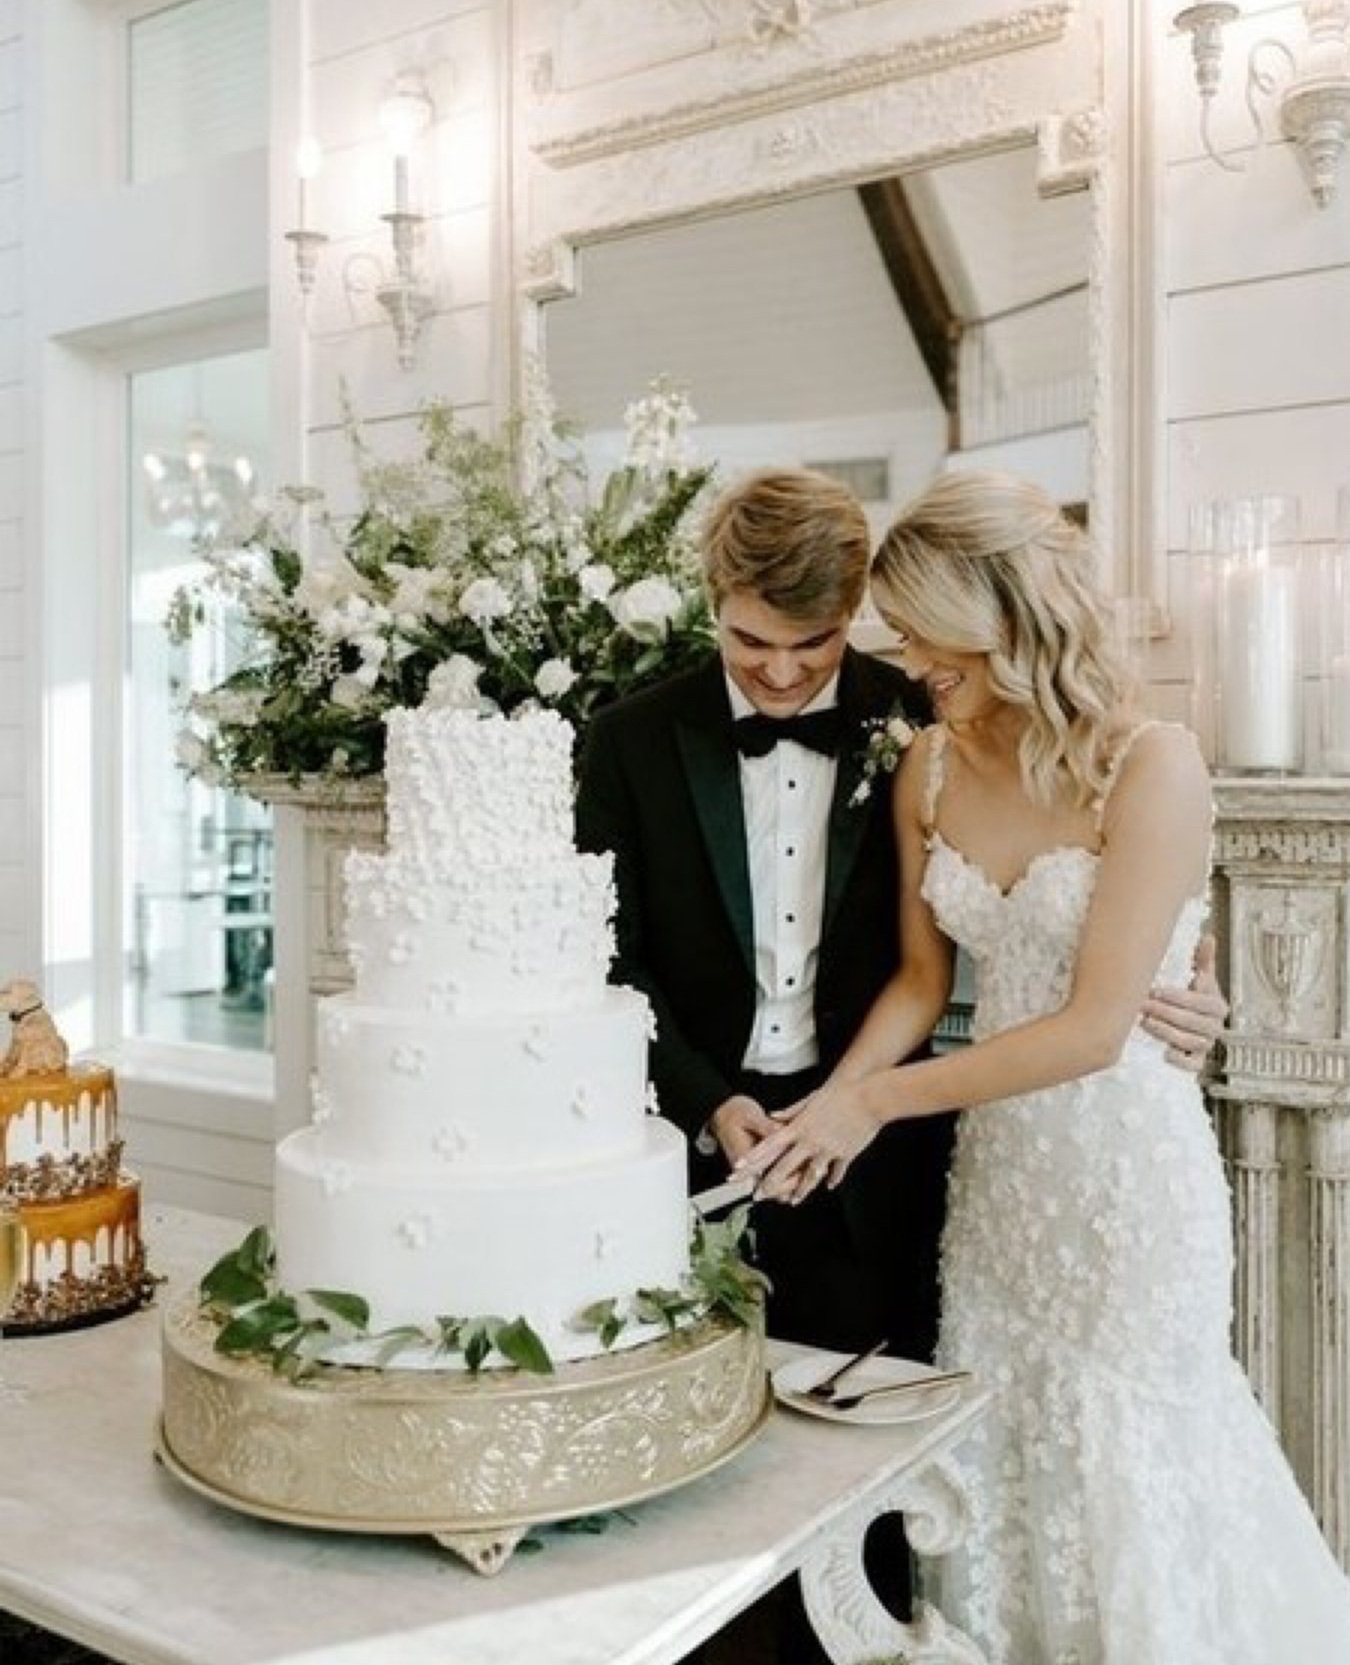 11 Wedding Cake Tips and Tricks for your Dream Wedding